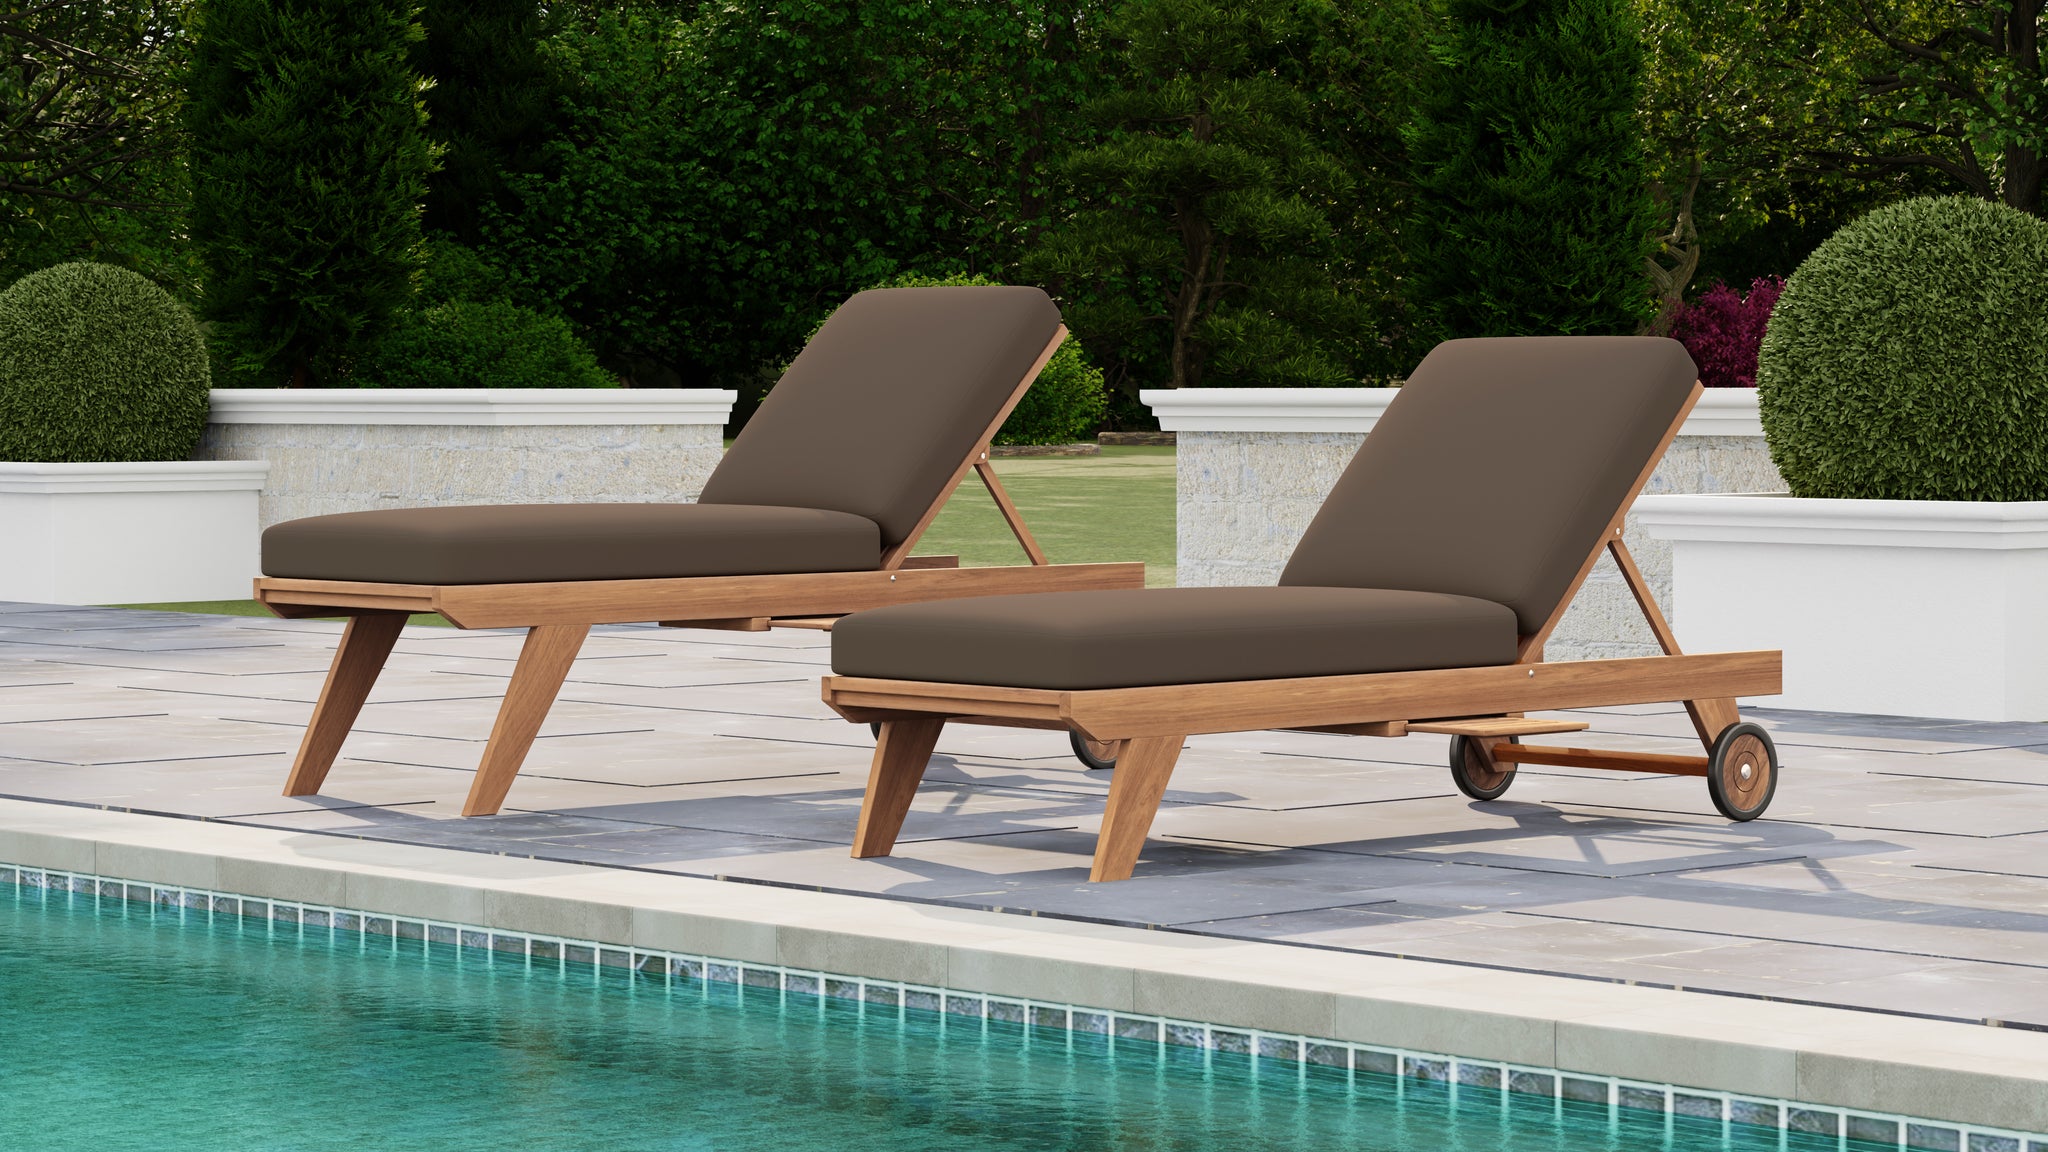 Image shows High Level alongside Standard Lounger to highlight the difference.